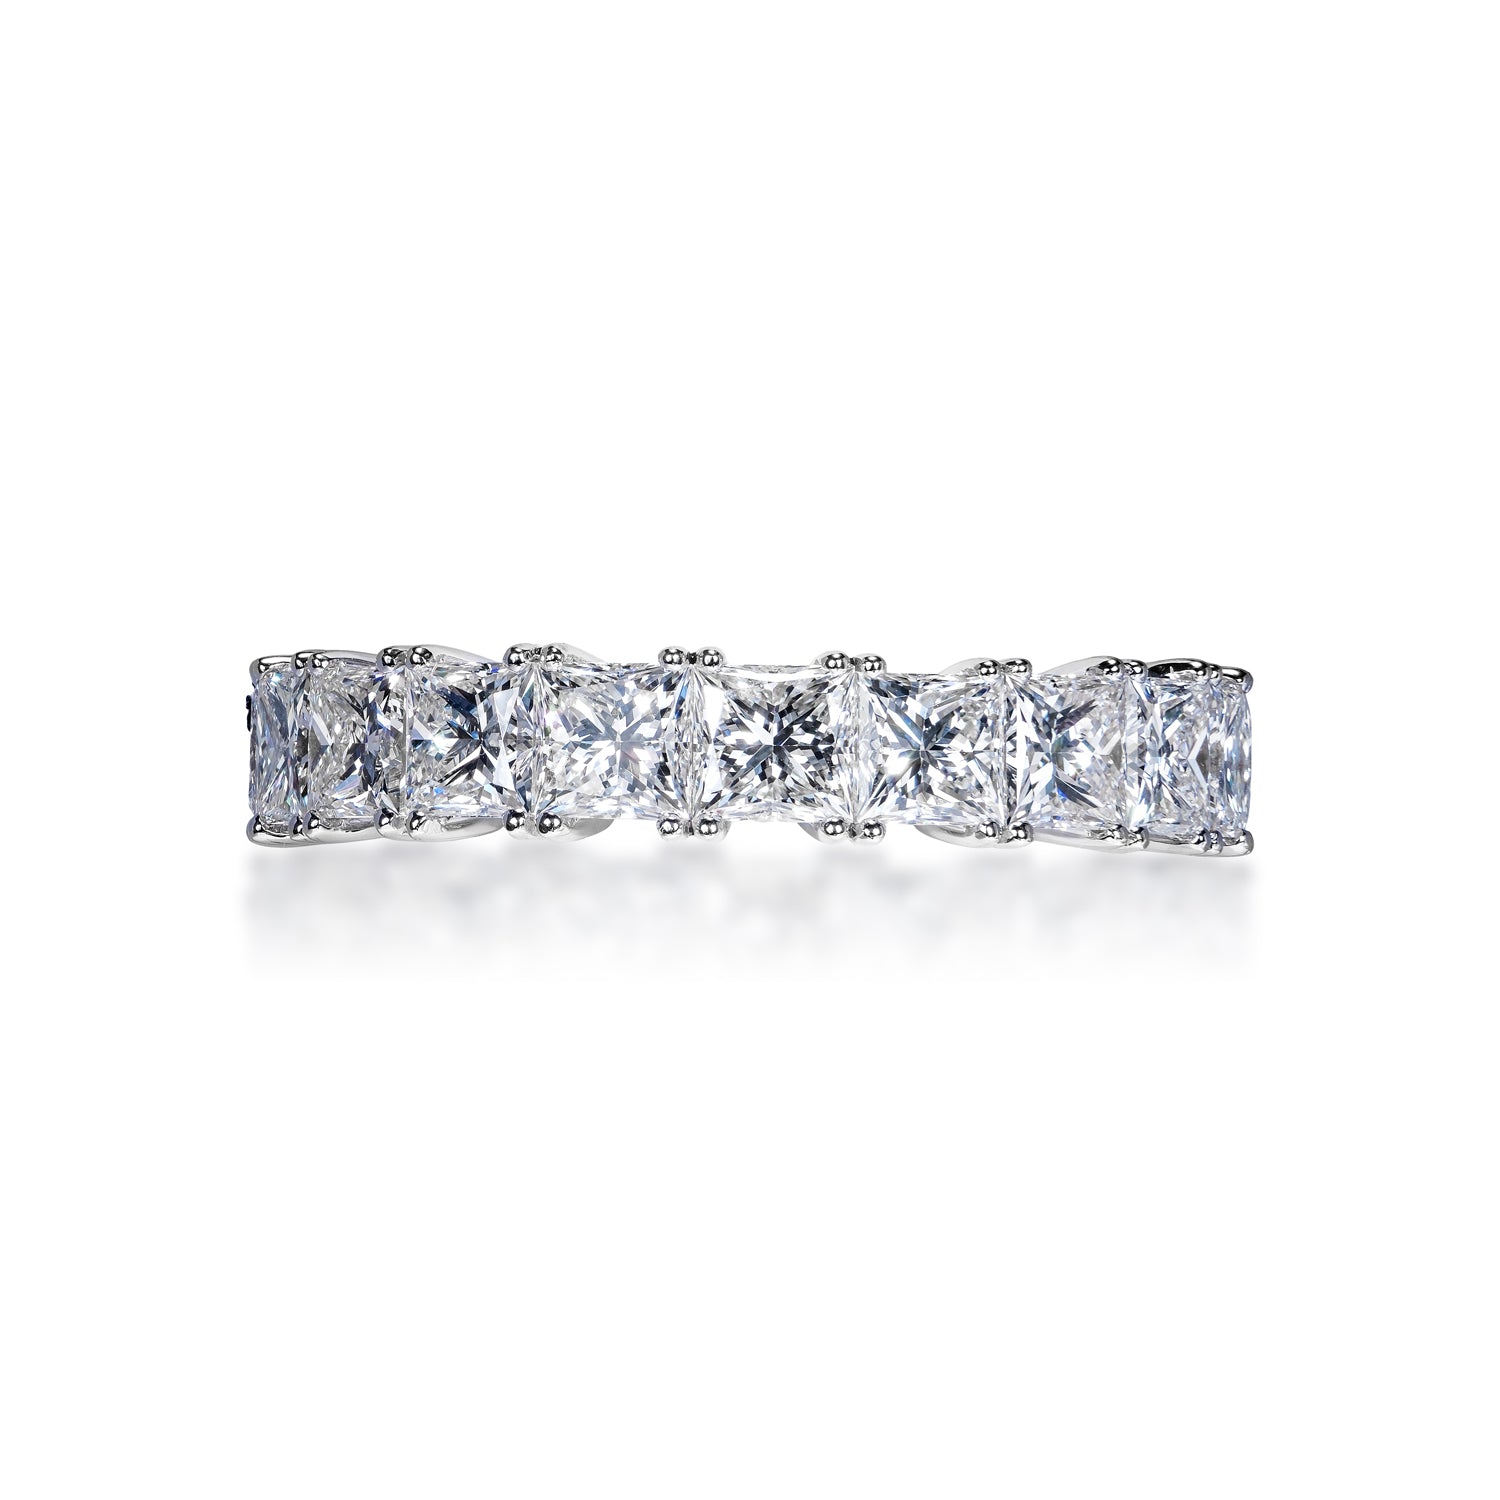 Zahra 5 Carat Princess Cut Diamond Eternity Band in 18k White Gold Shared Prong Front VIew